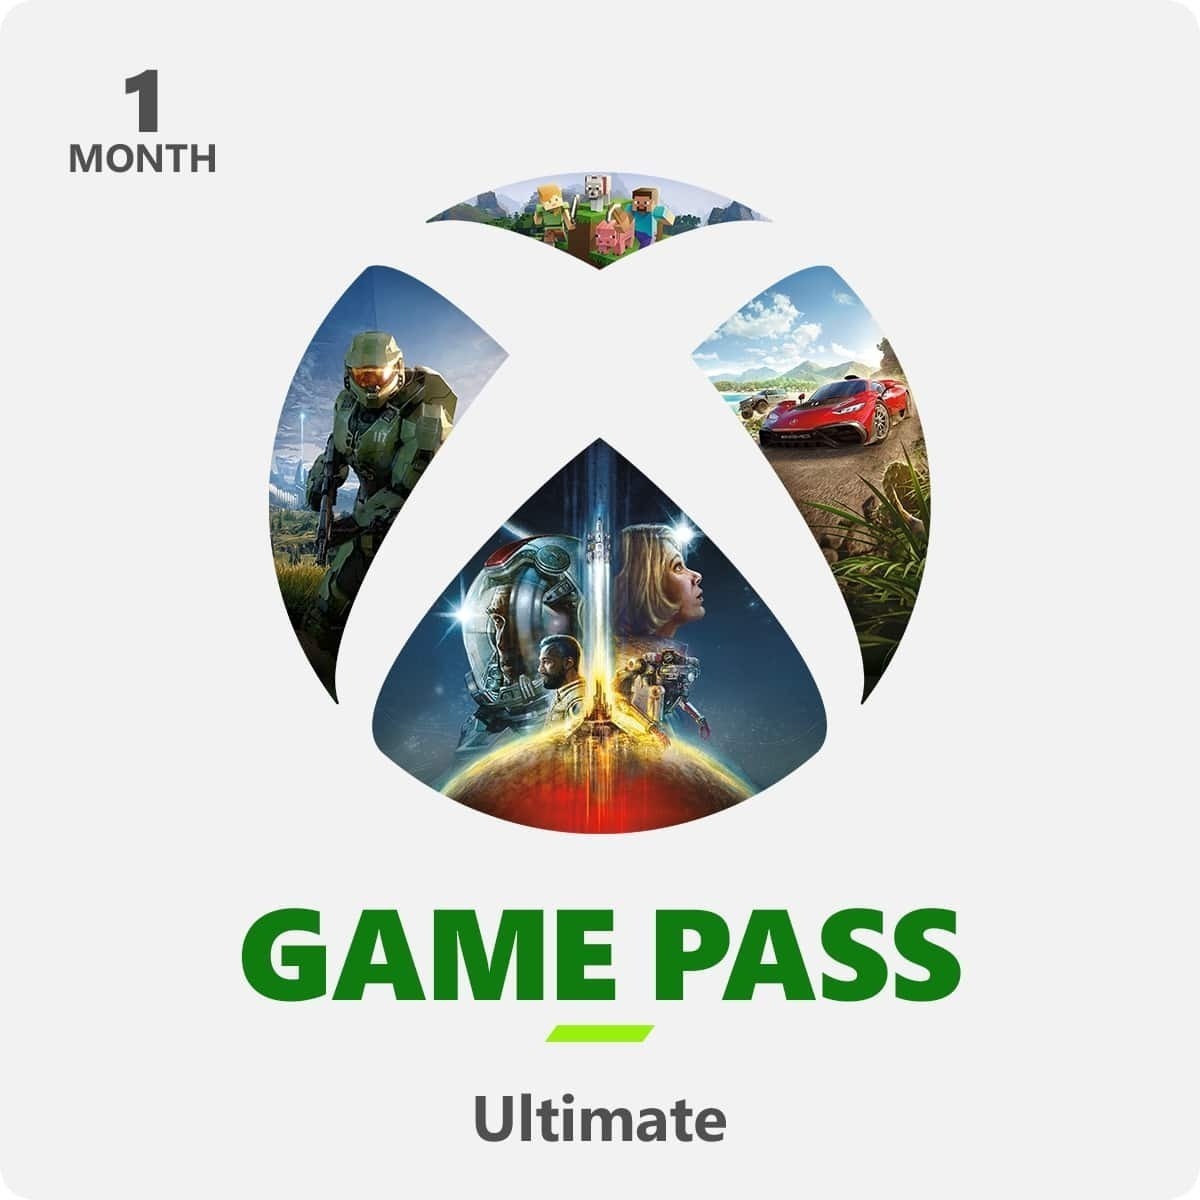 Microsoft Xbox Game Pass Ultimate 1 Month Membership (Email Delivery) $10 & More